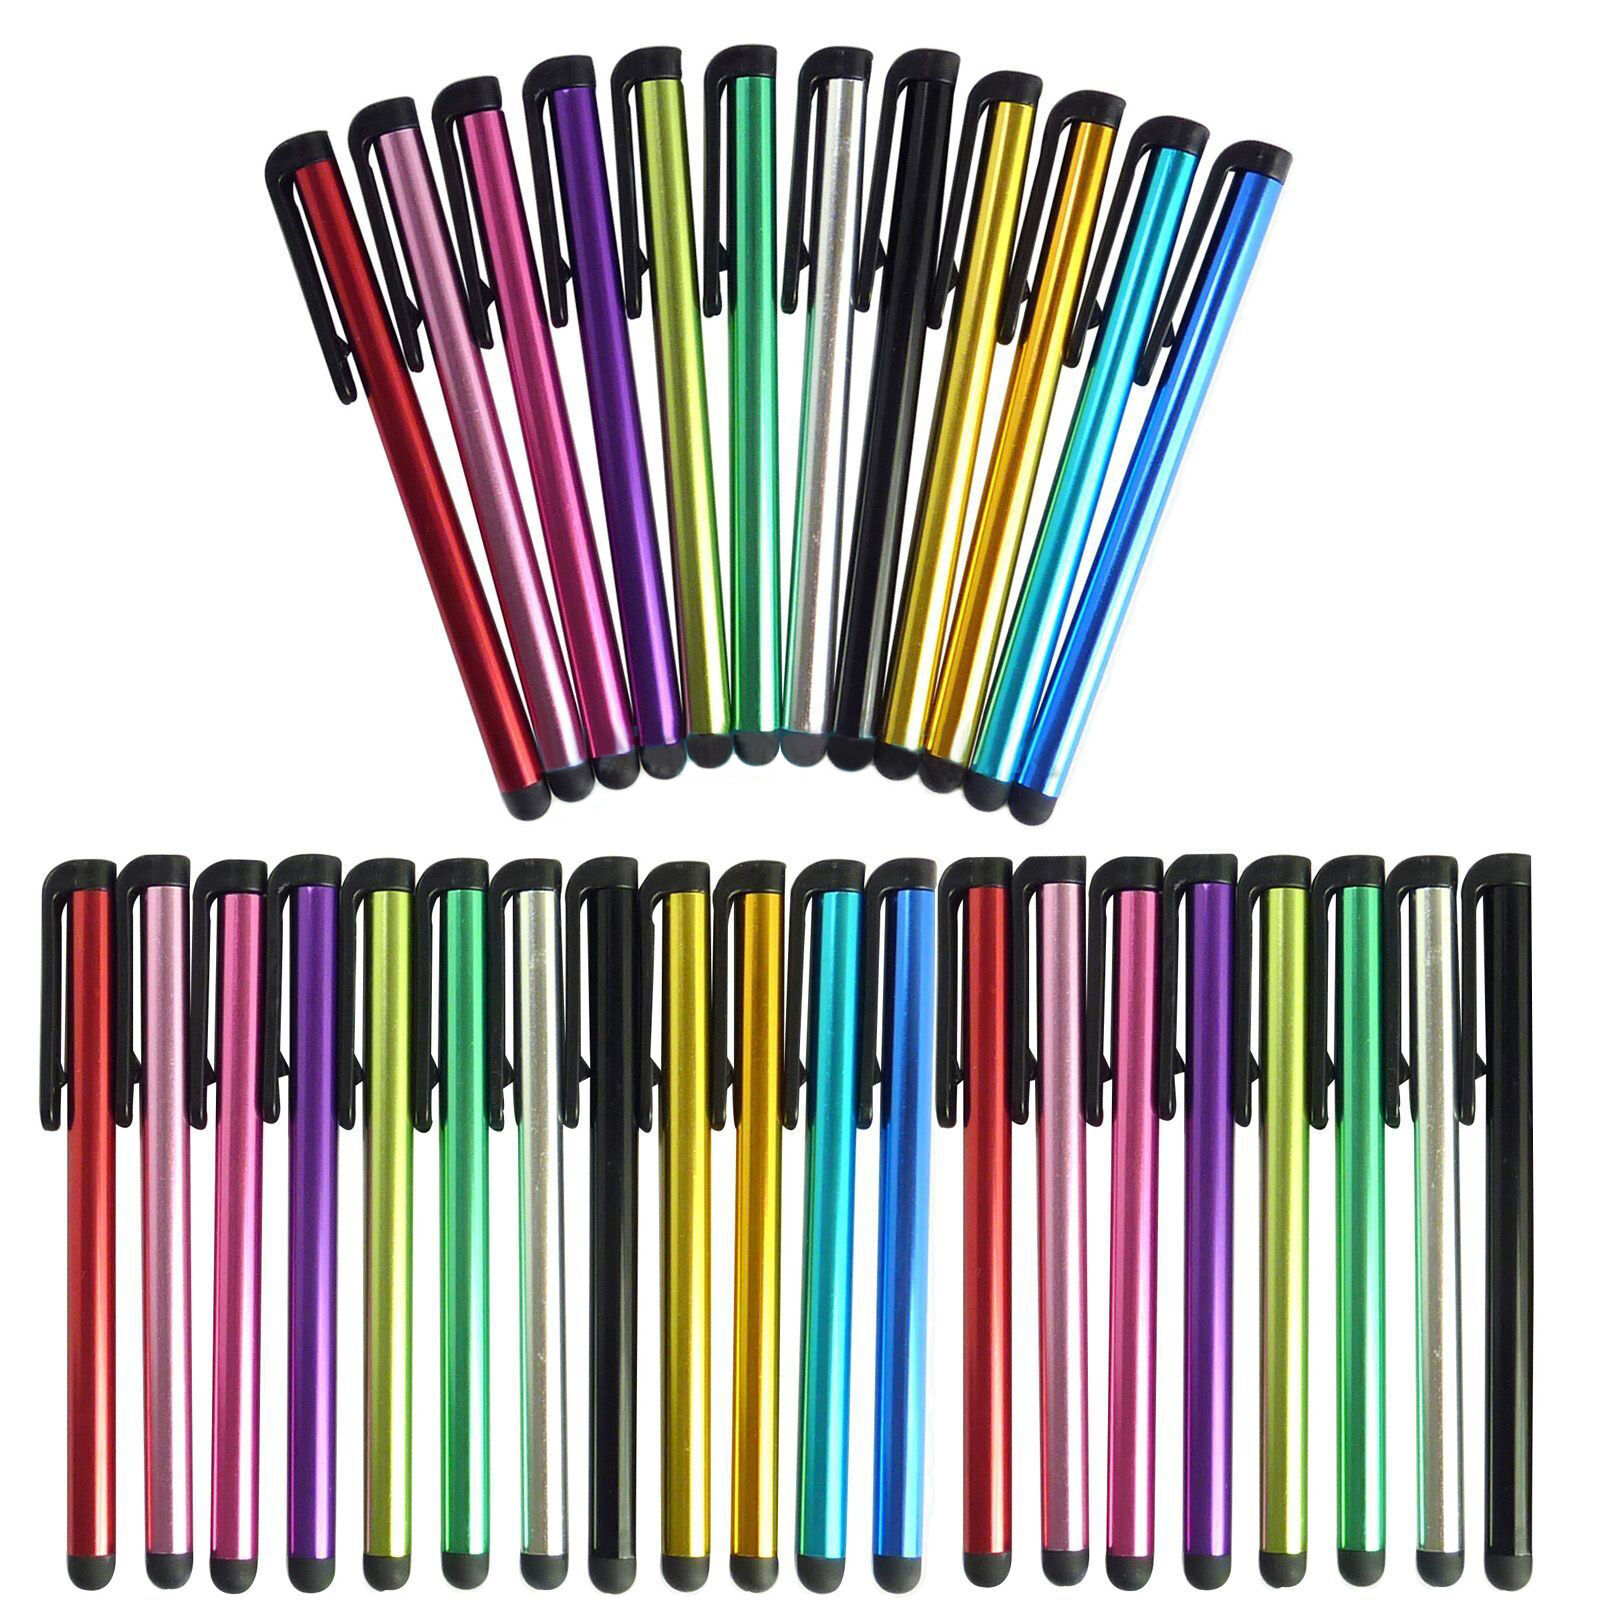 New 100x Universal Stylus Touch Screen Pen For Samsung Tablet PC Tab iPad iPhone